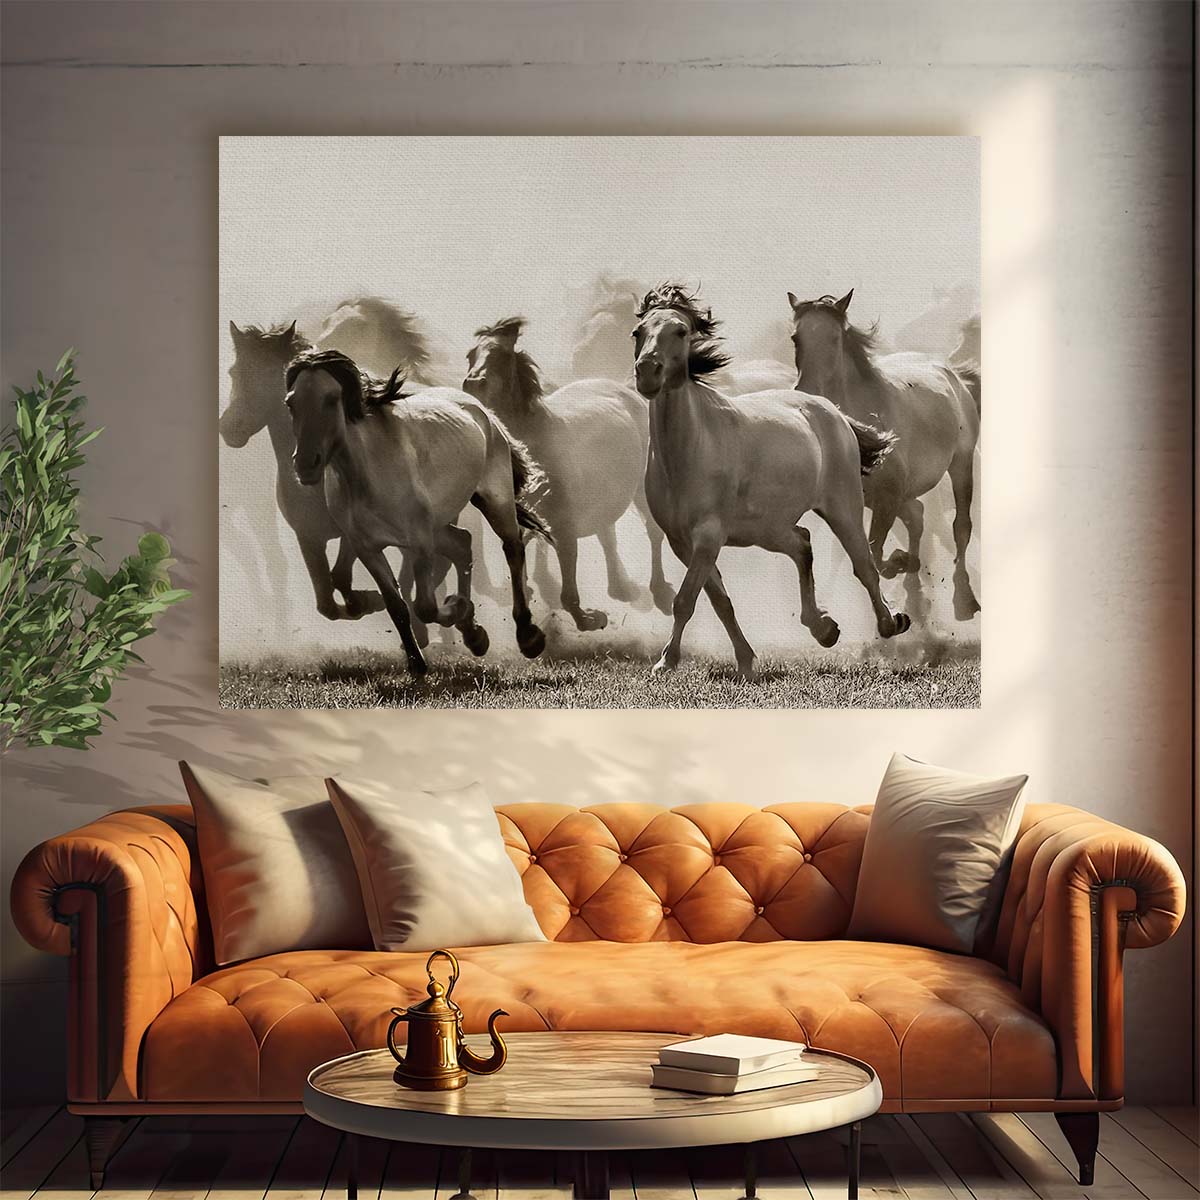 Dramatic HighSpeed Horse Herd Wall Art by Luxuriance Designs. Made in USA.